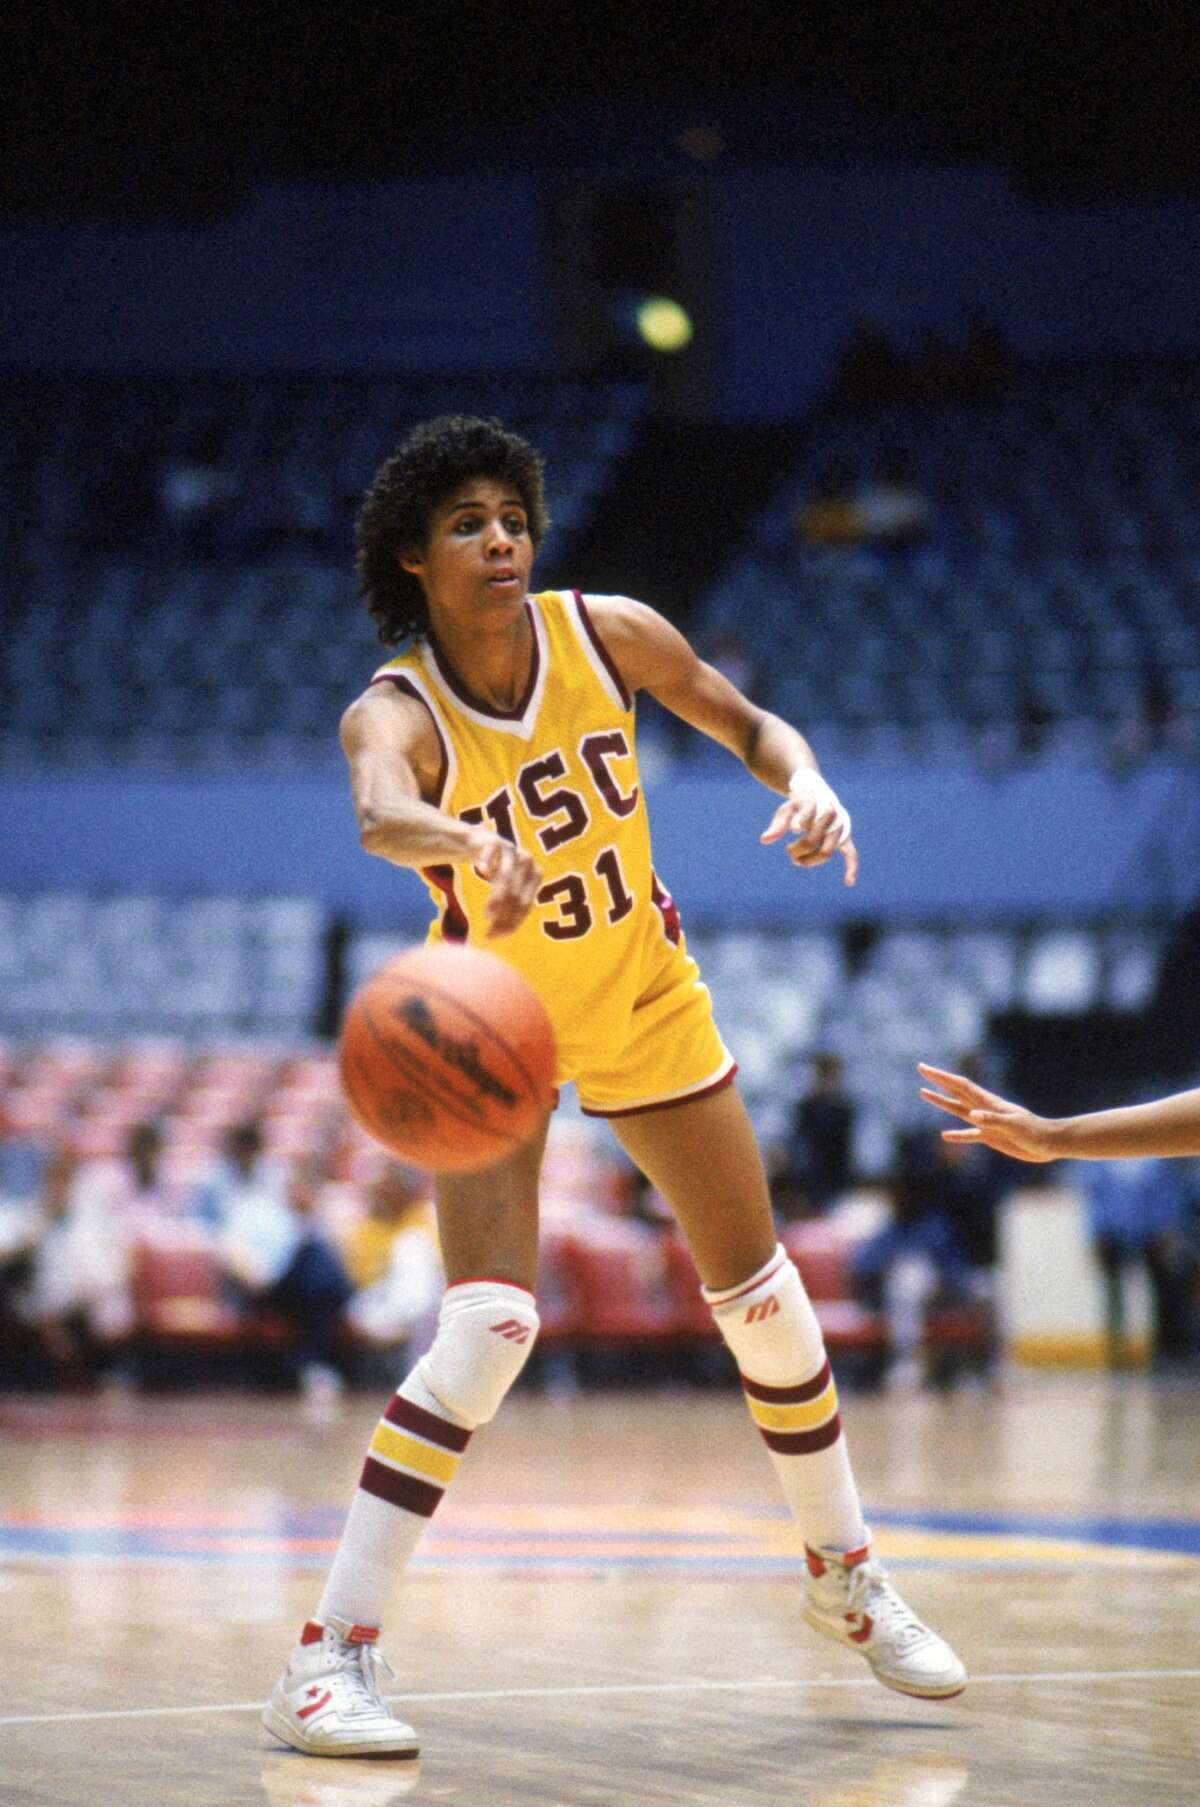 PALO ALTO, CA - Cheryl Miller #31 of USC Trojans passes the ball during a women basketball game against the Stanford Cardinal in Palo Alto, California. Cheryl Miller's college career lasted from 1983-1986. (Photo by: Mike Powell/Getty Images)